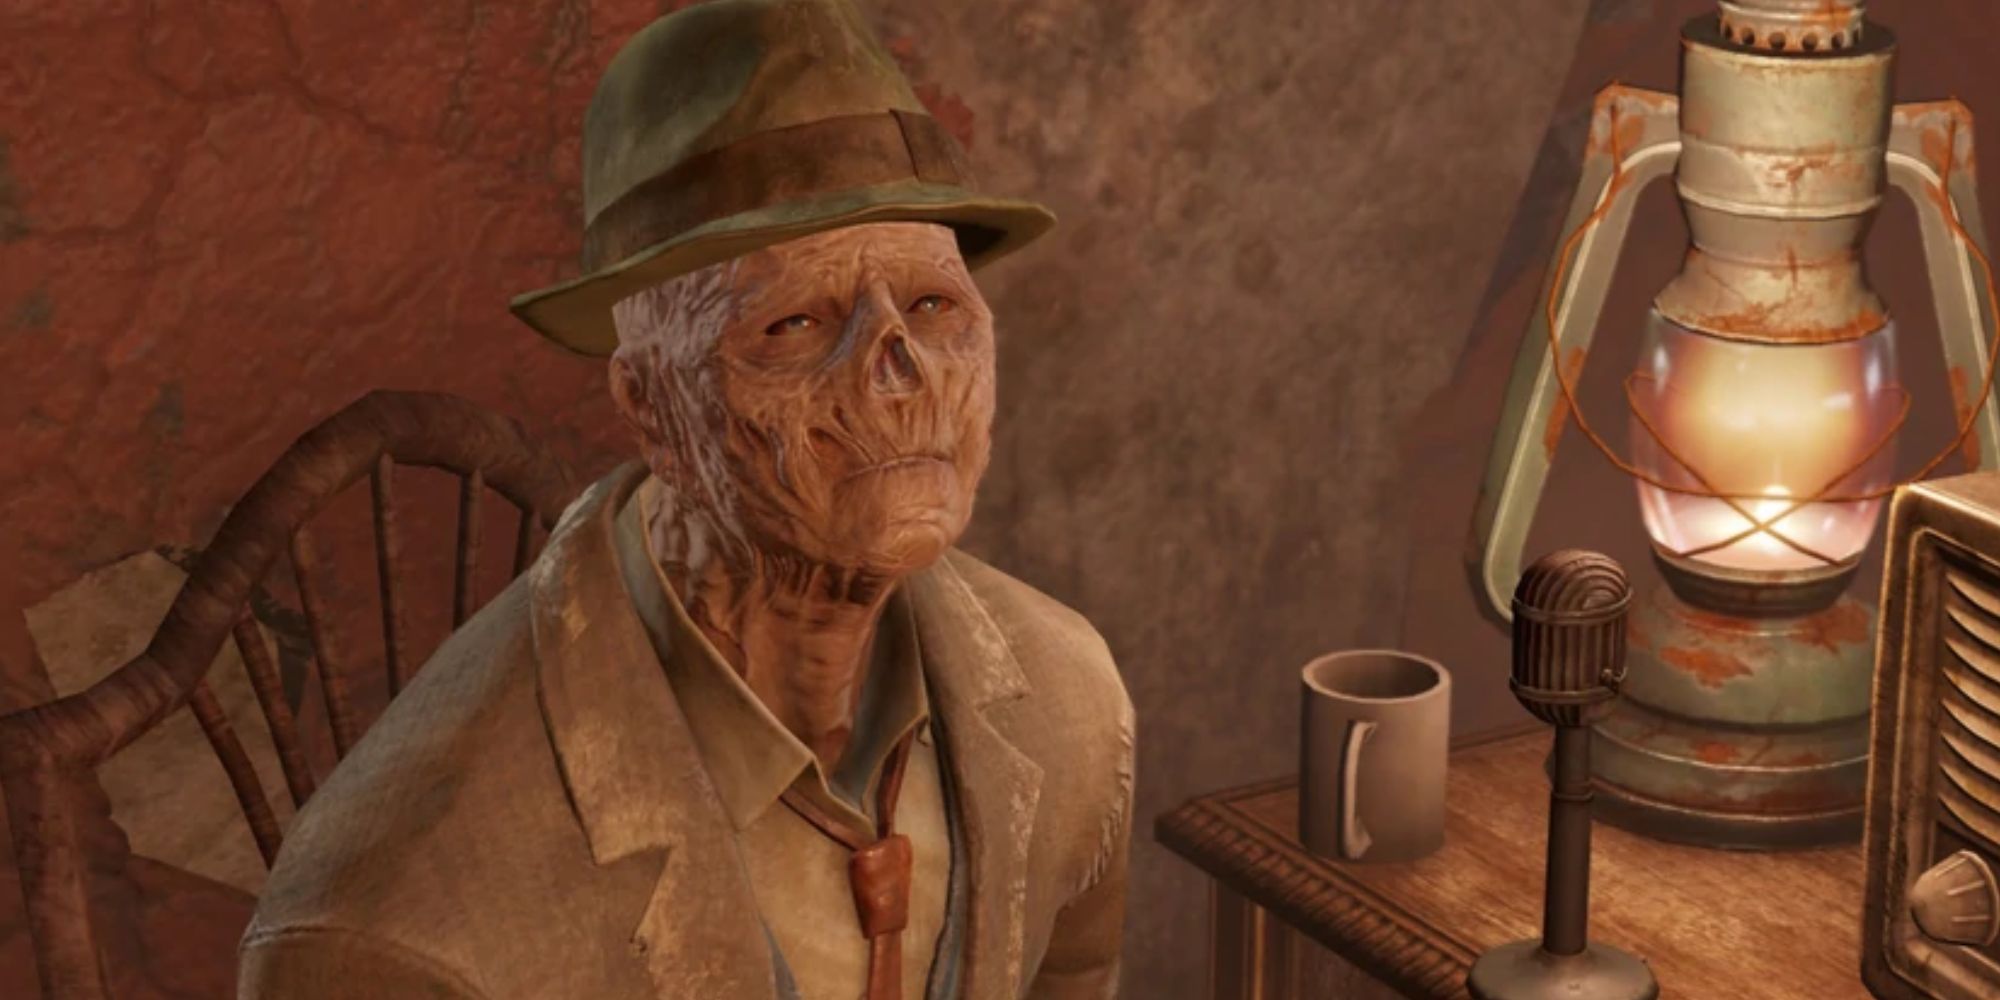 The character Kent Connolly from Fallout 4